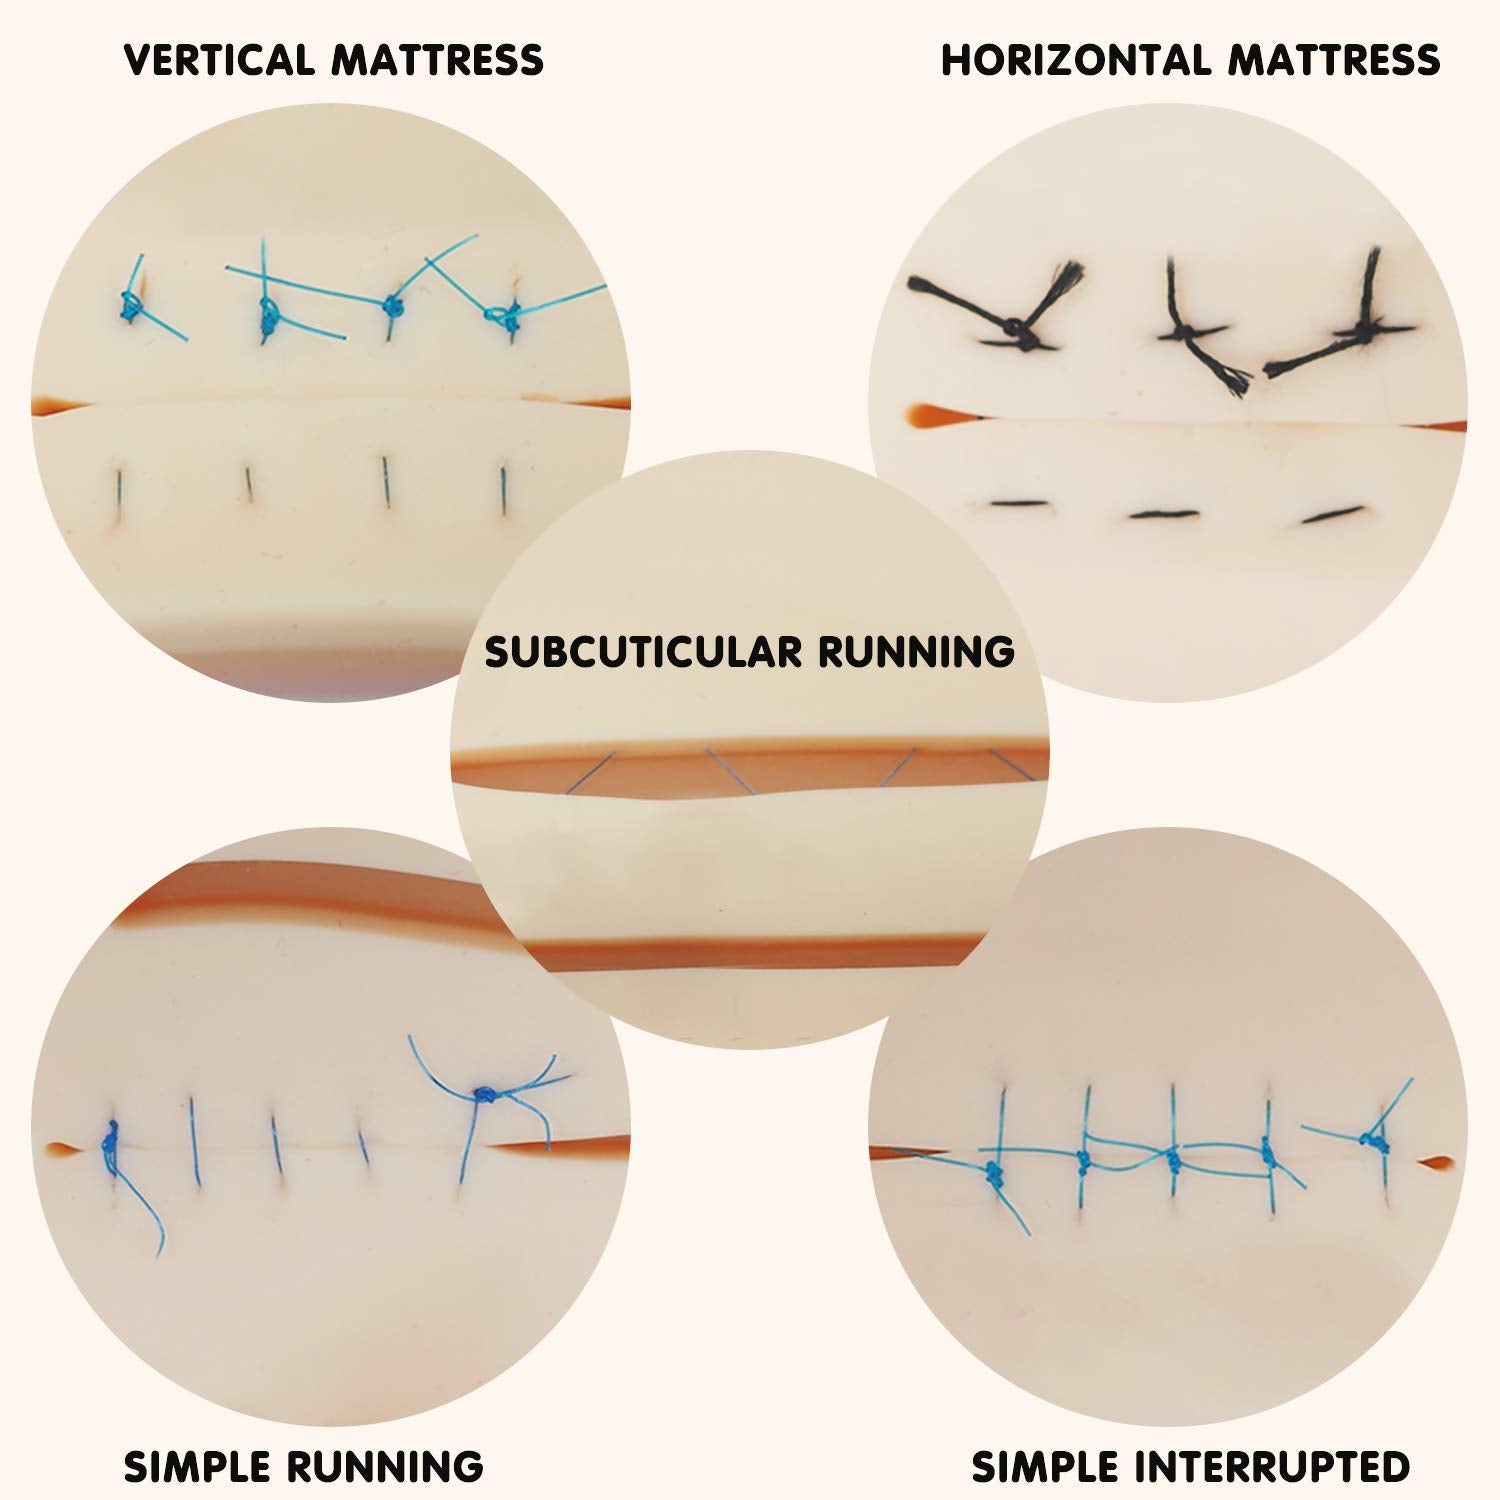 Suture Practice Complete Kit (30 Pieces) for Medical Student Suture Training, Include Upgrade Suture Pad with 14 Pre-Cut Wounds, Suture Tools, Suture Thread & Needle